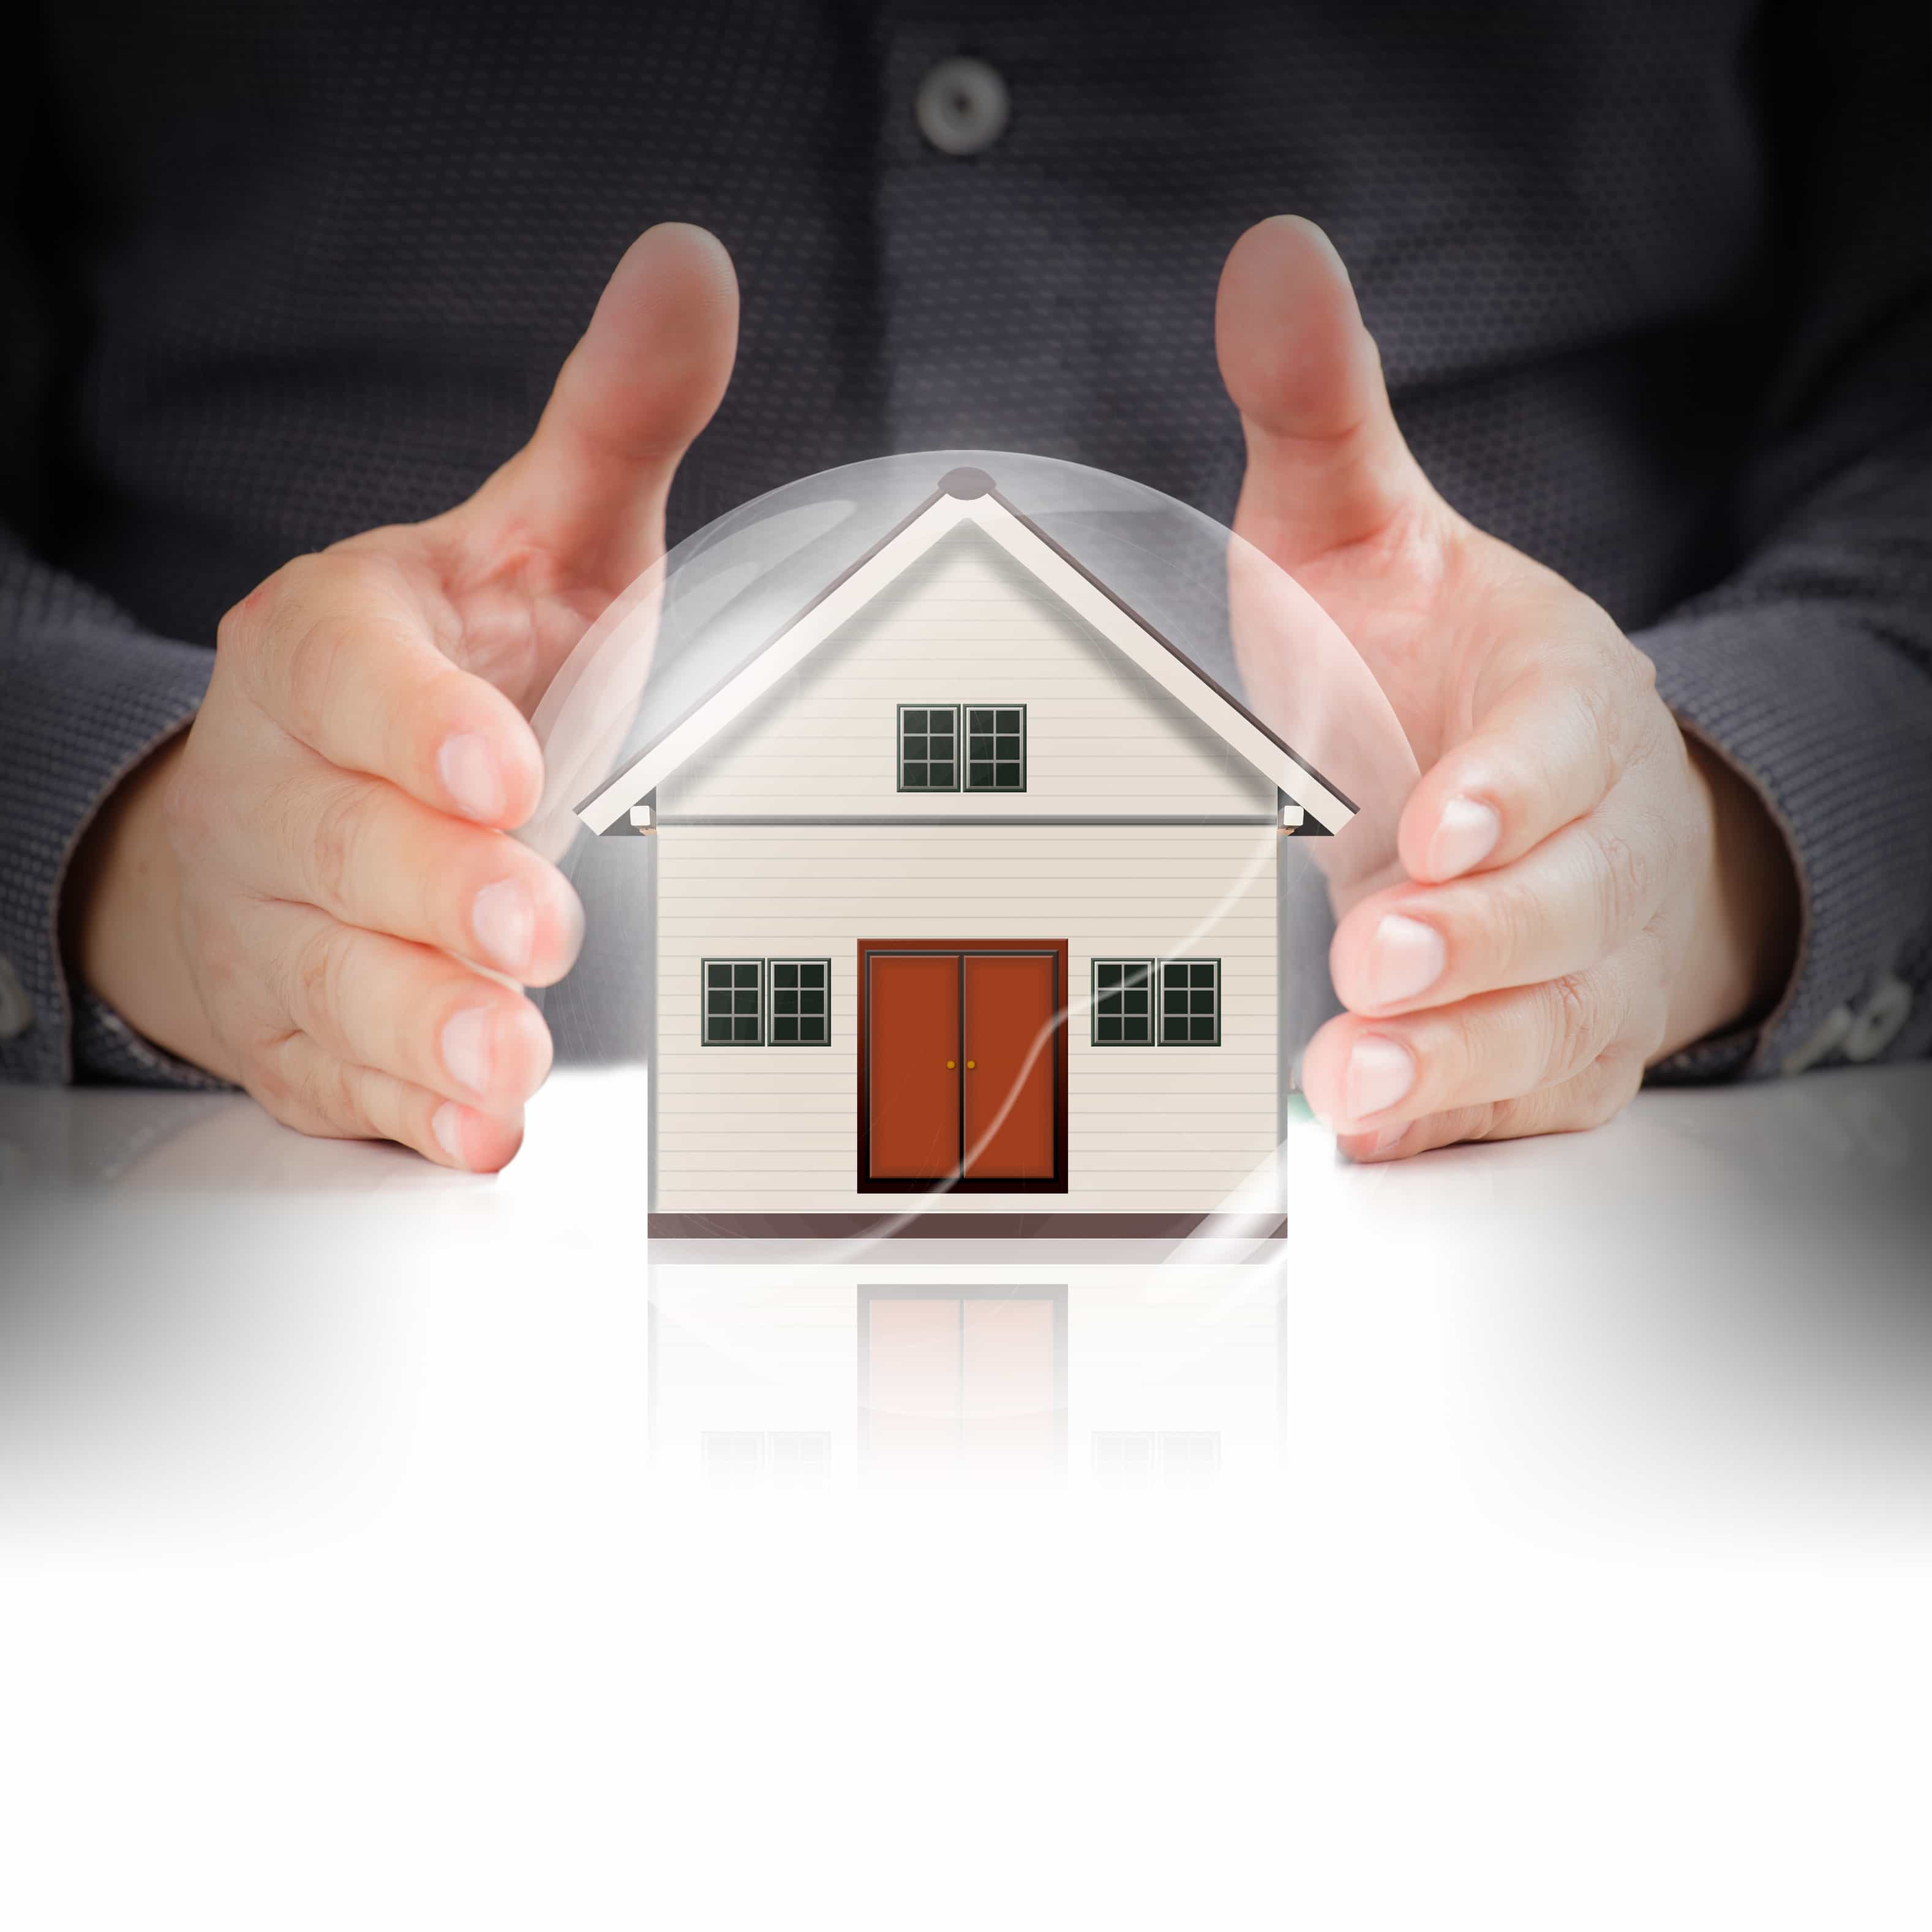 How can I safeguard my ability to pay off my home loan?